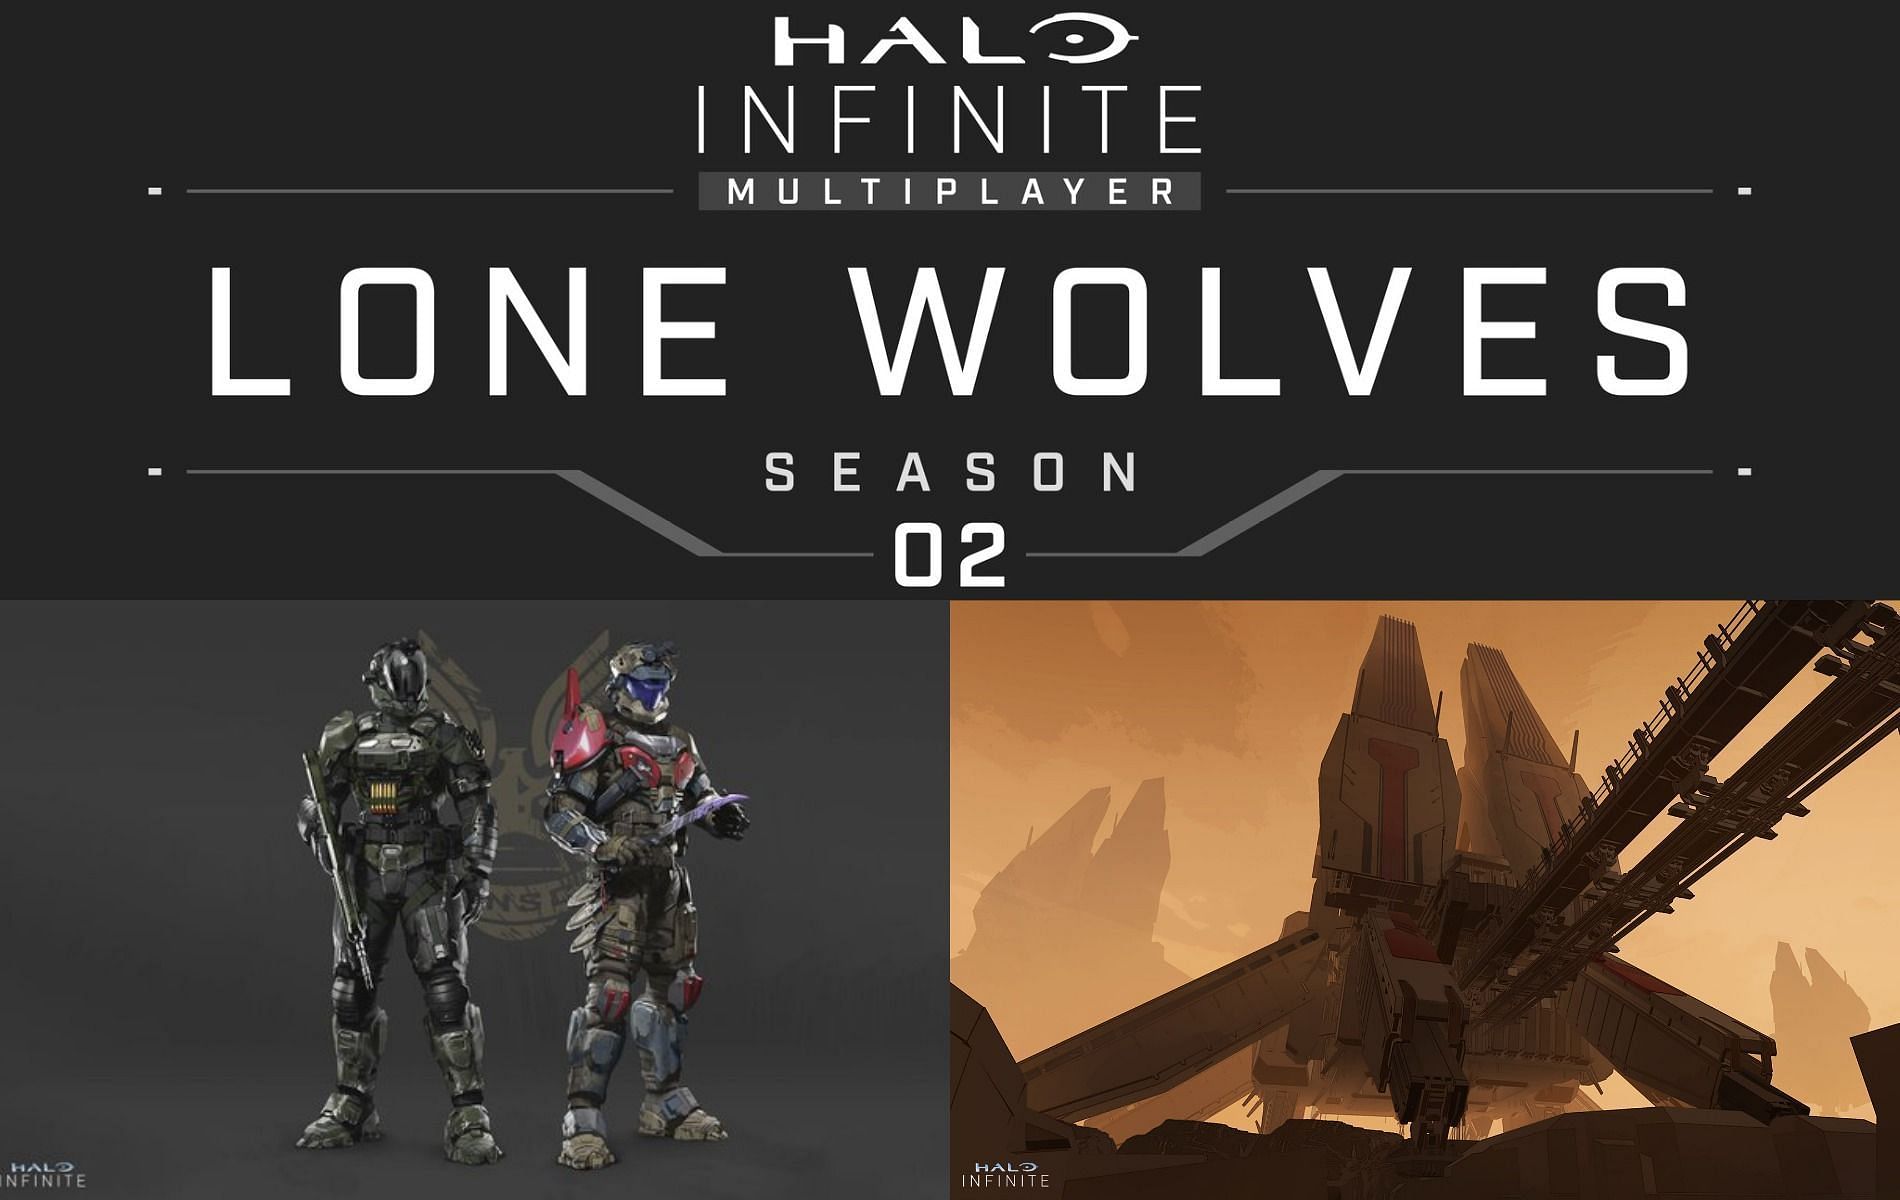 Season 2 is titled Lone Wolves (Images by 343 Industries)